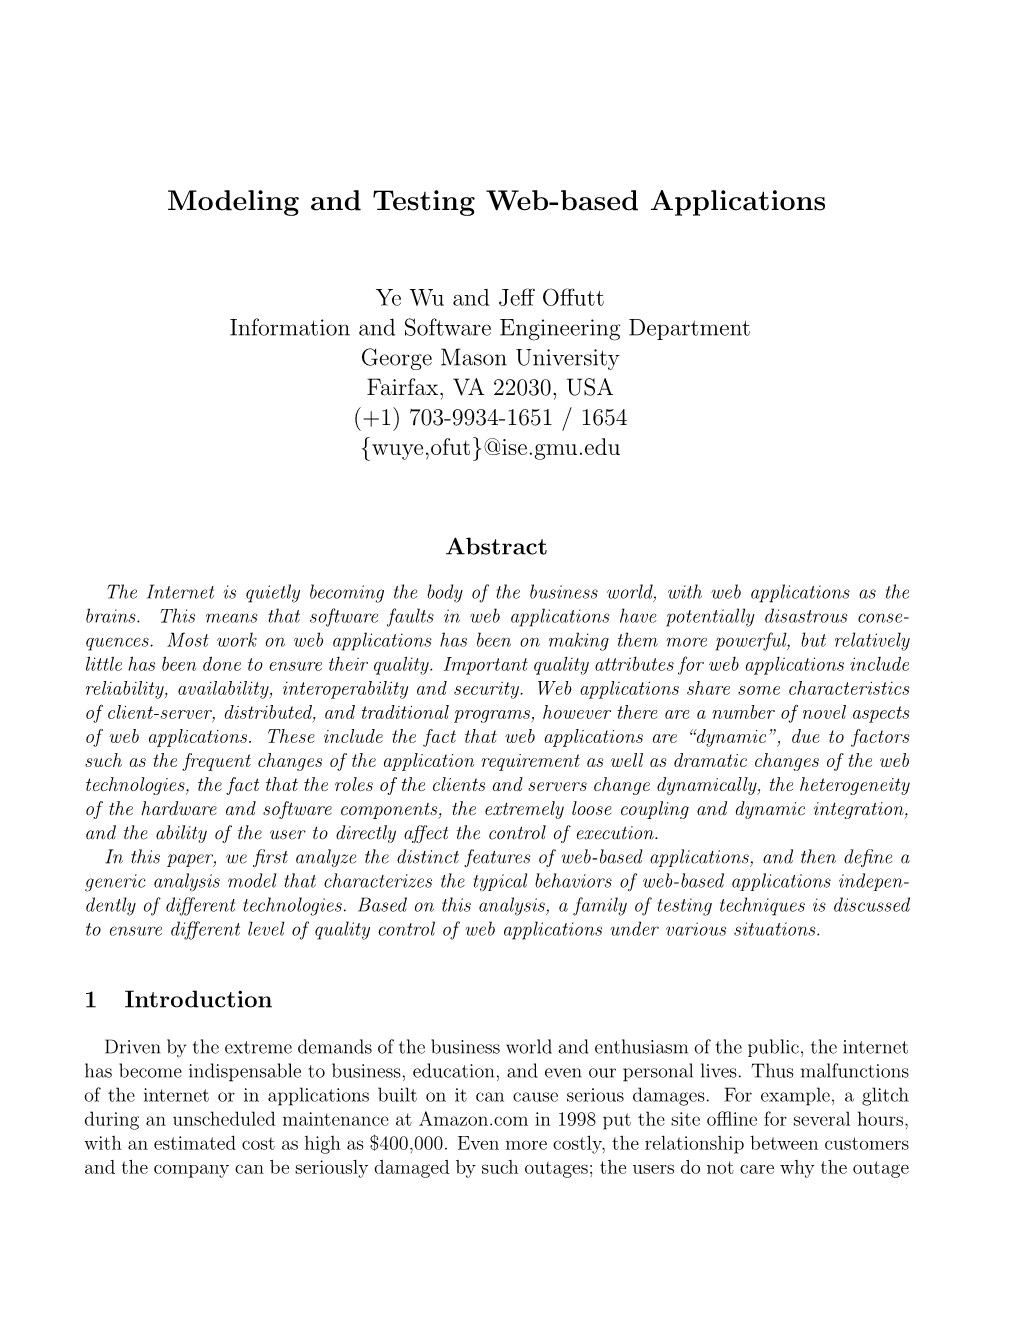 Modeling and Testing Web-Based Applications